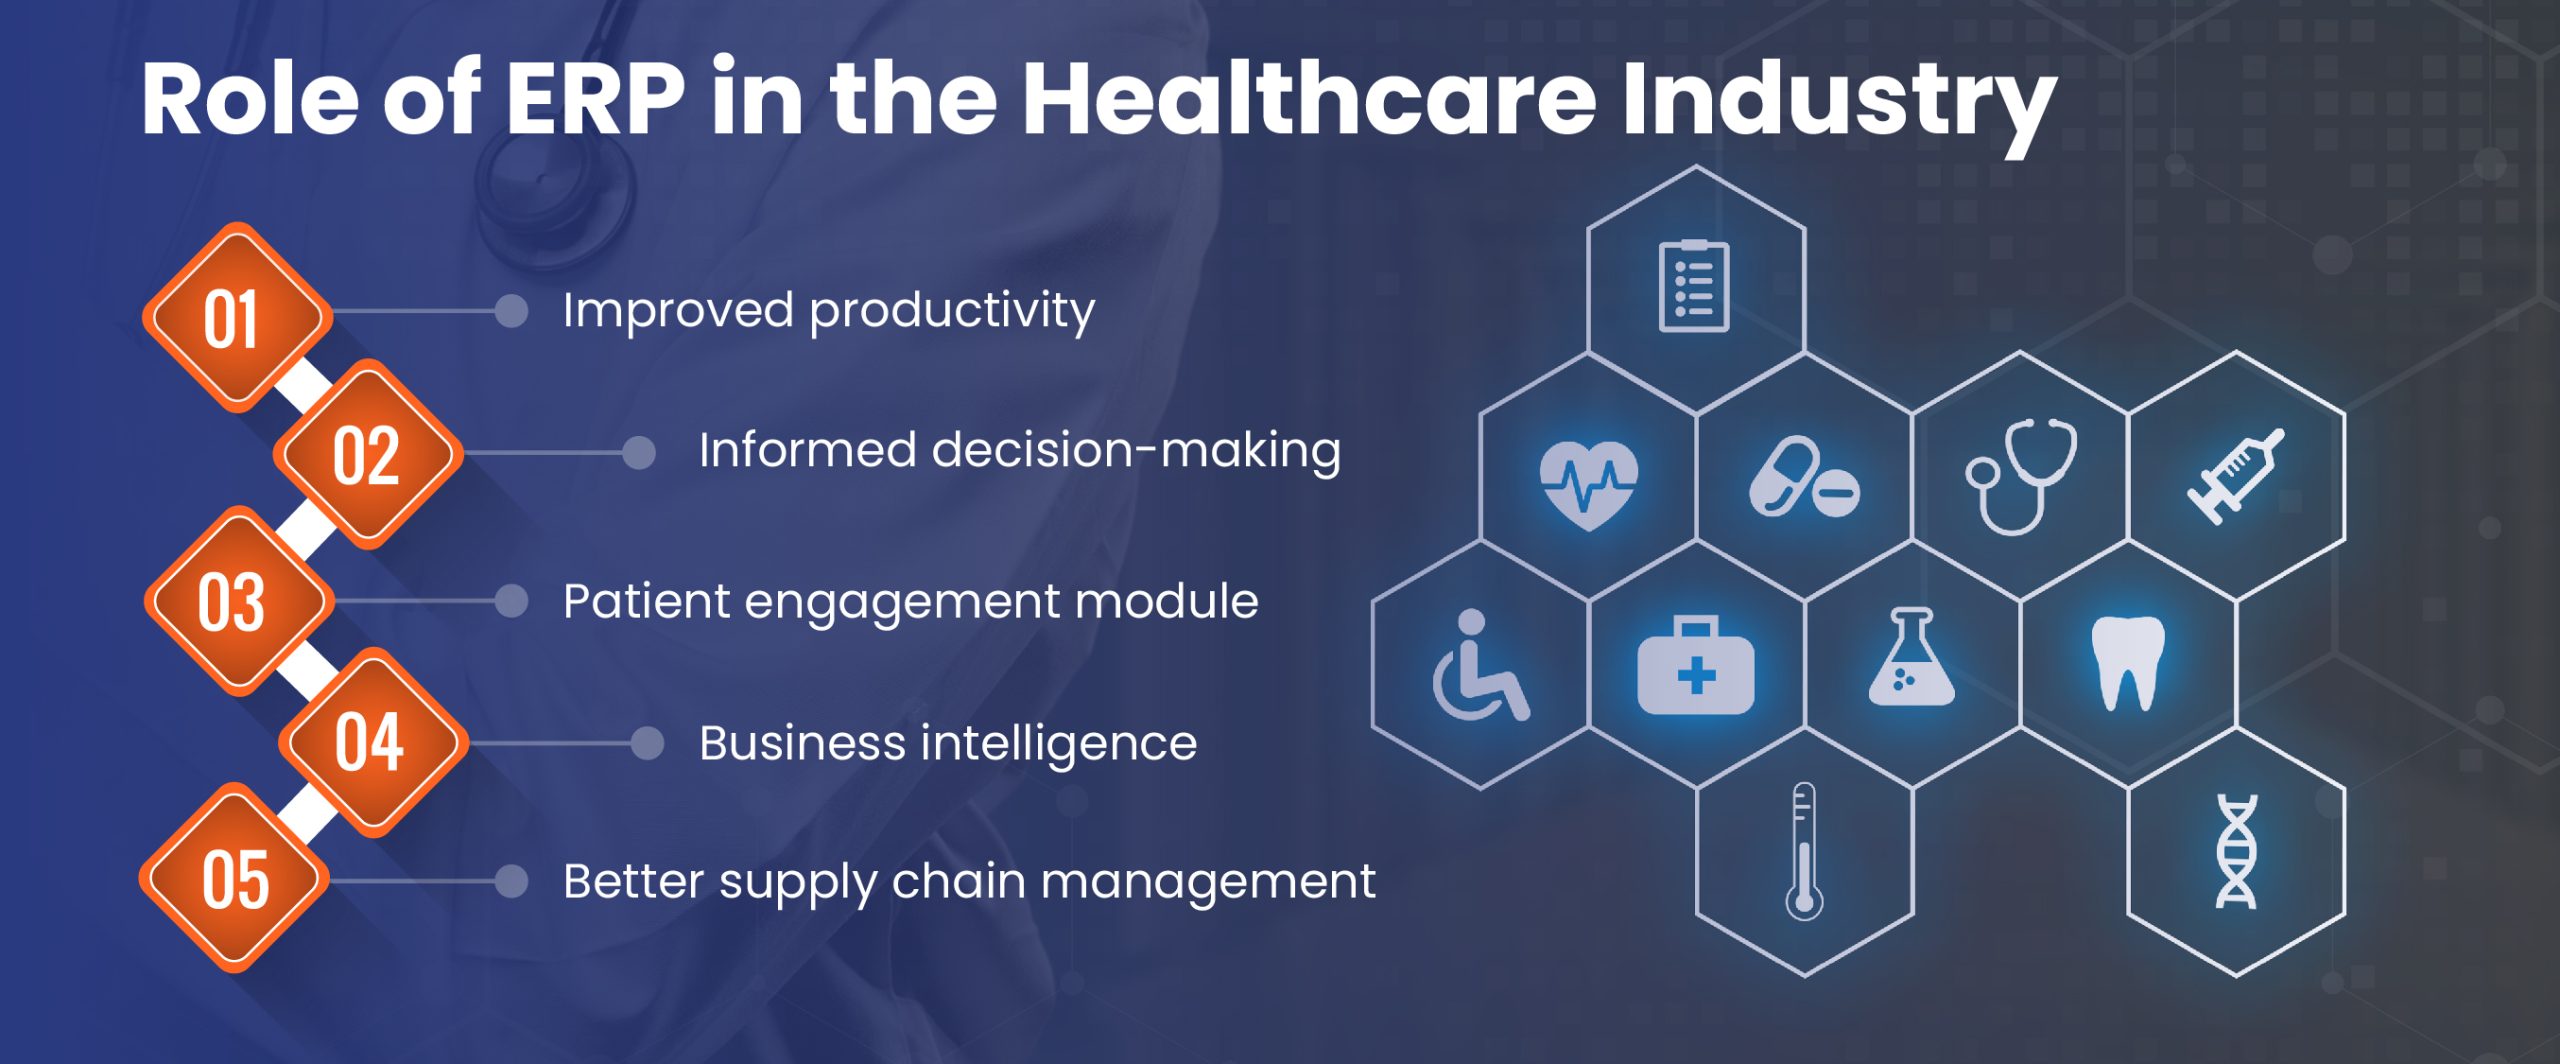 role of ERP in Healthcare Industry